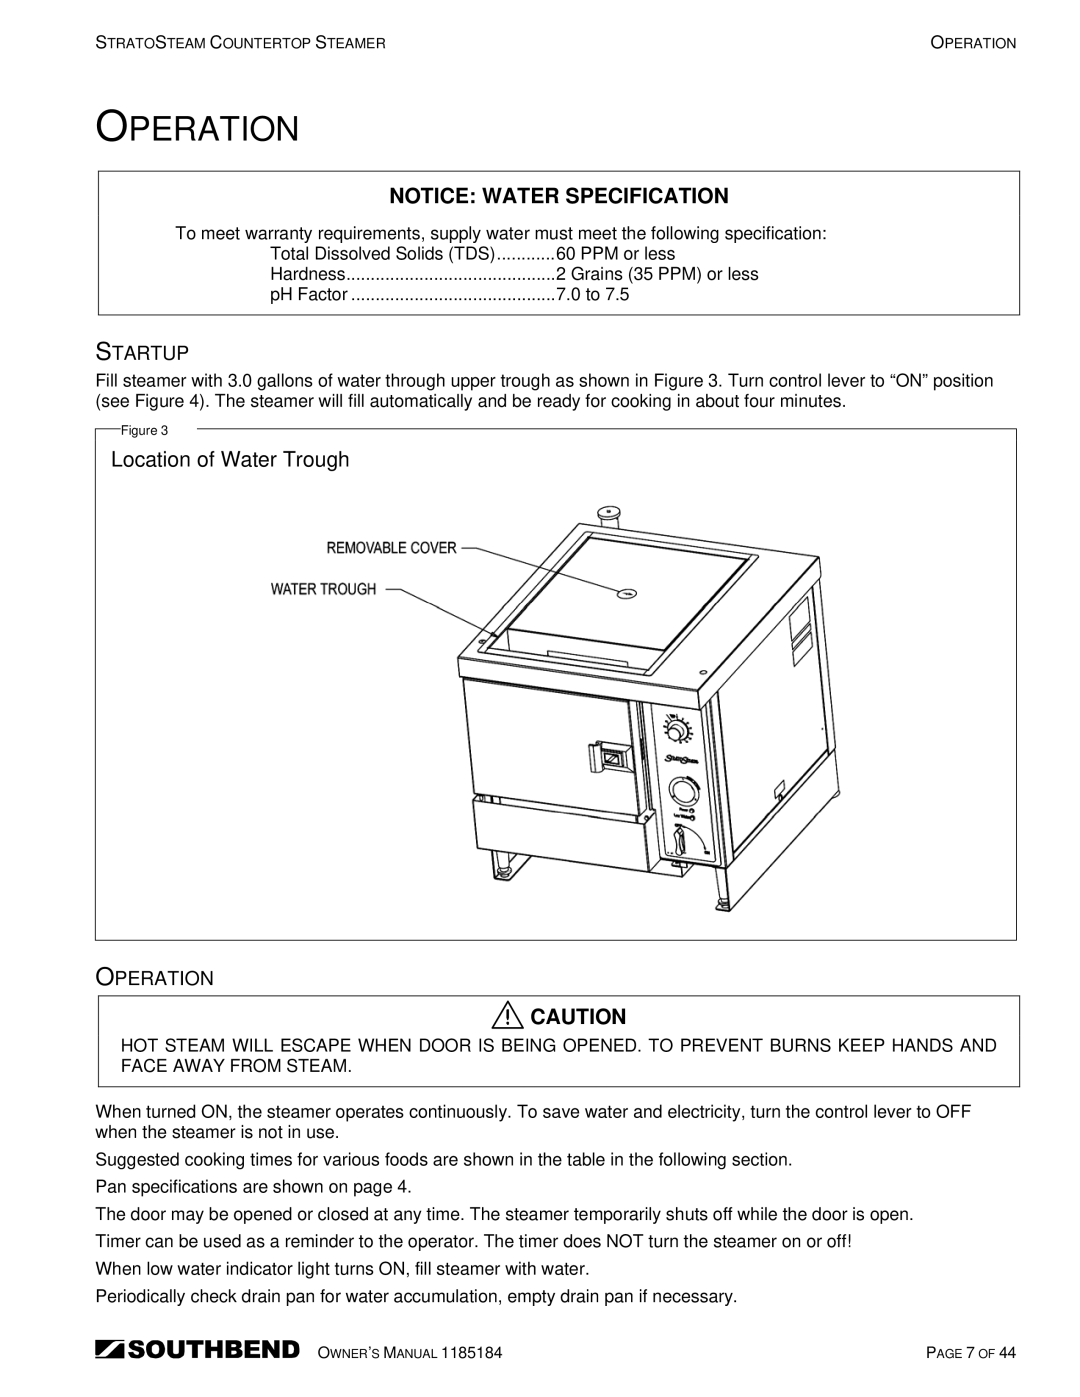 Southbend STRE-5EZ, STRE-3EZ owner manual Operation, Location of Water Trough, Startup 